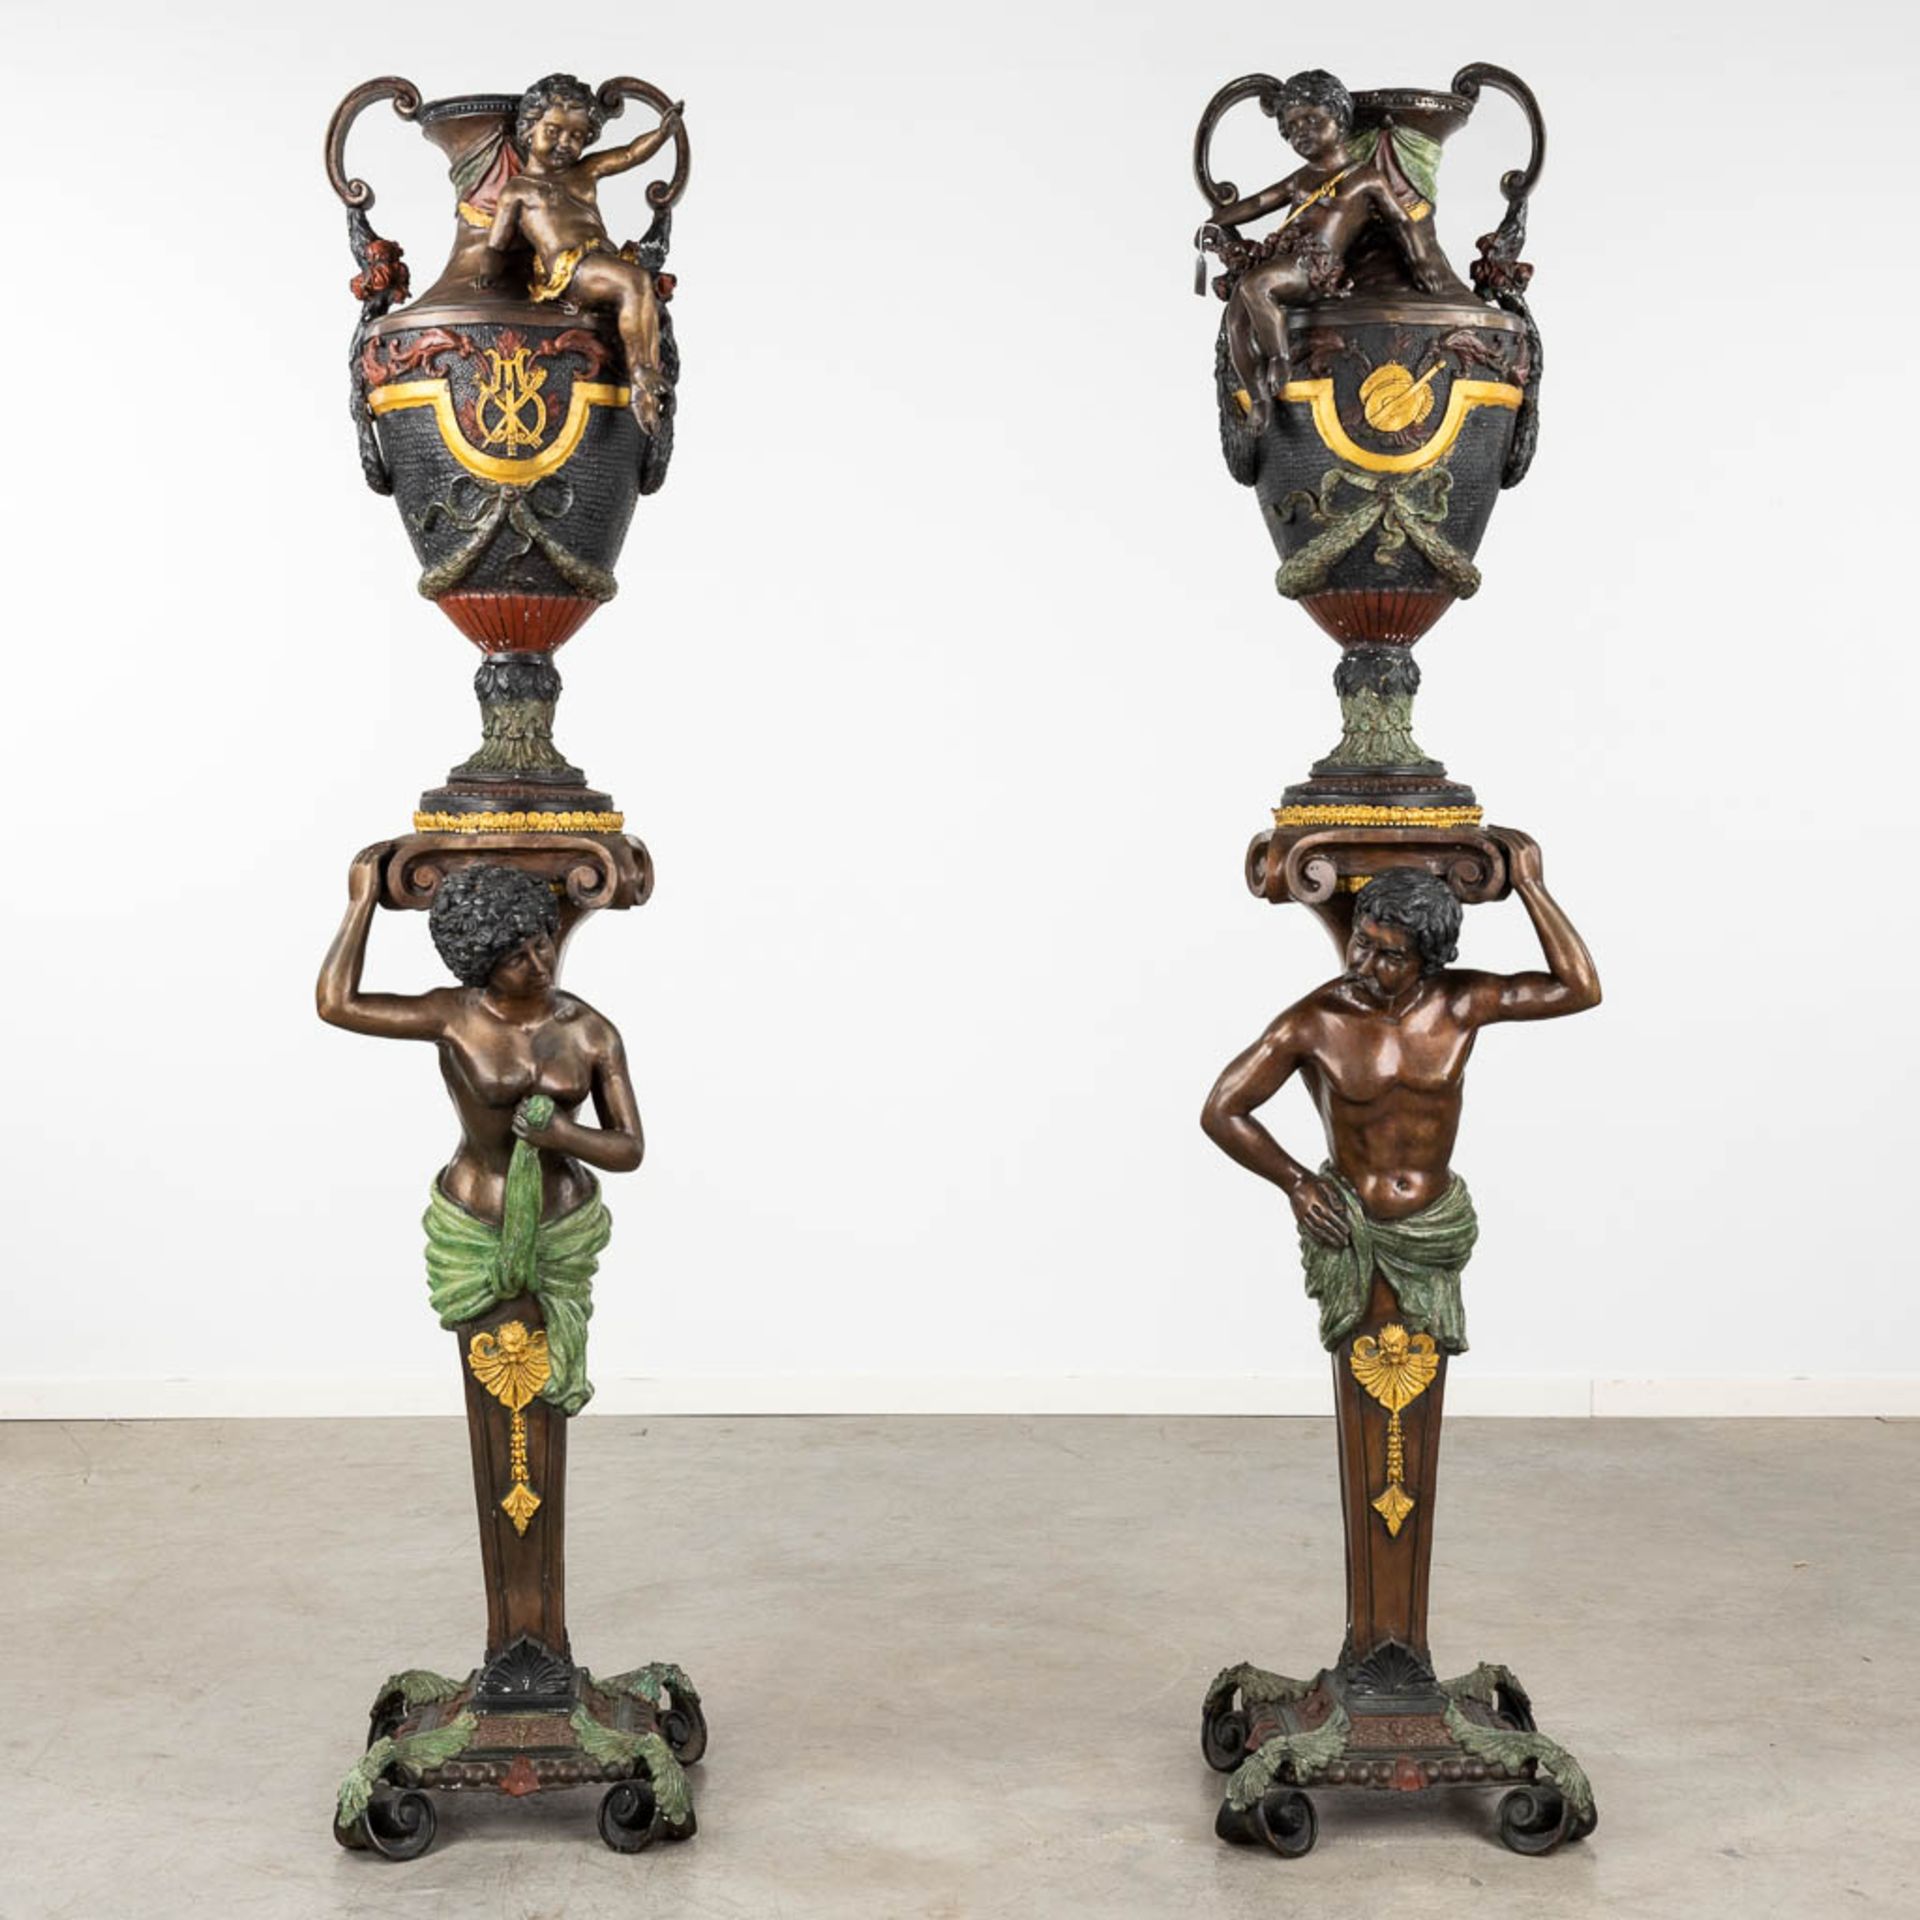 A pair of large urns standing on pedstals, decorated with figurines, bronze, 20th C. (D:38 x W:40 x 